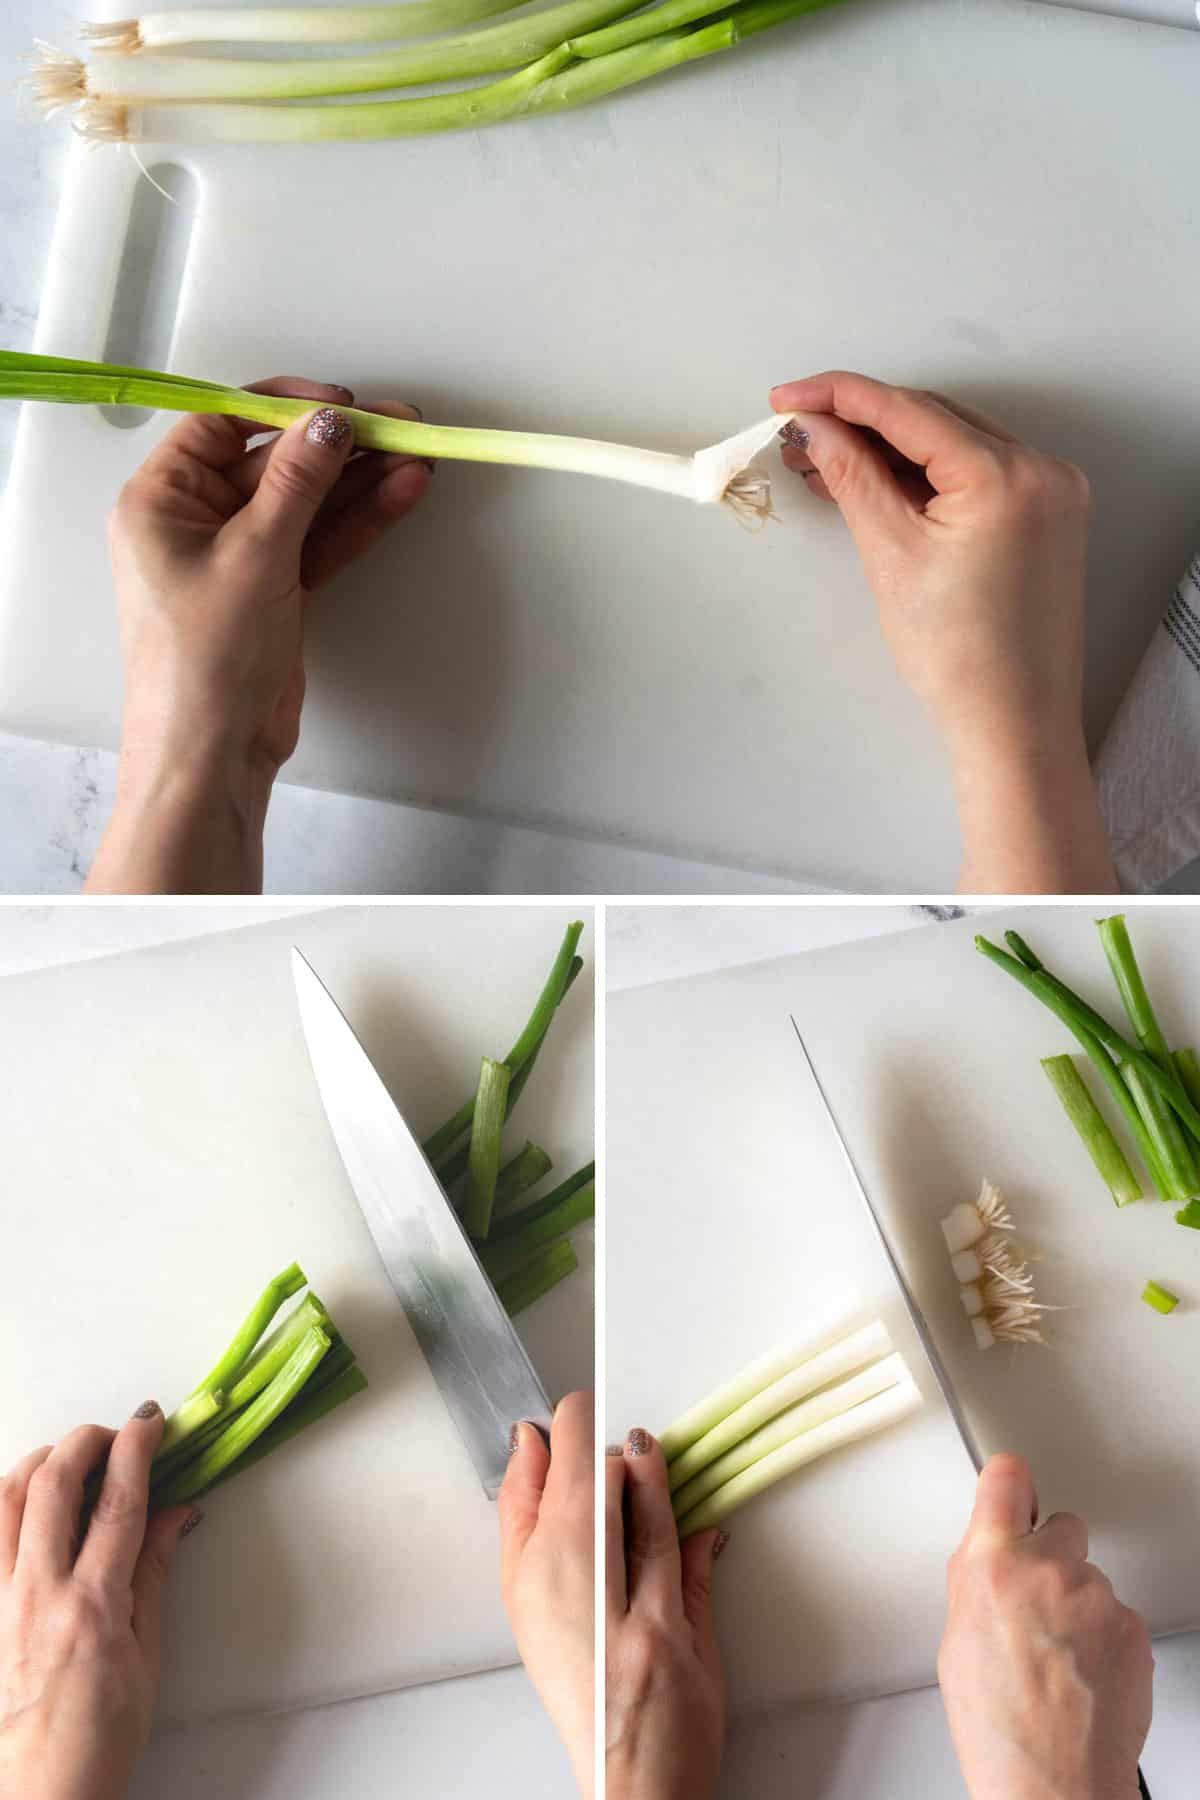 Person cleaning and trimming a green onion.